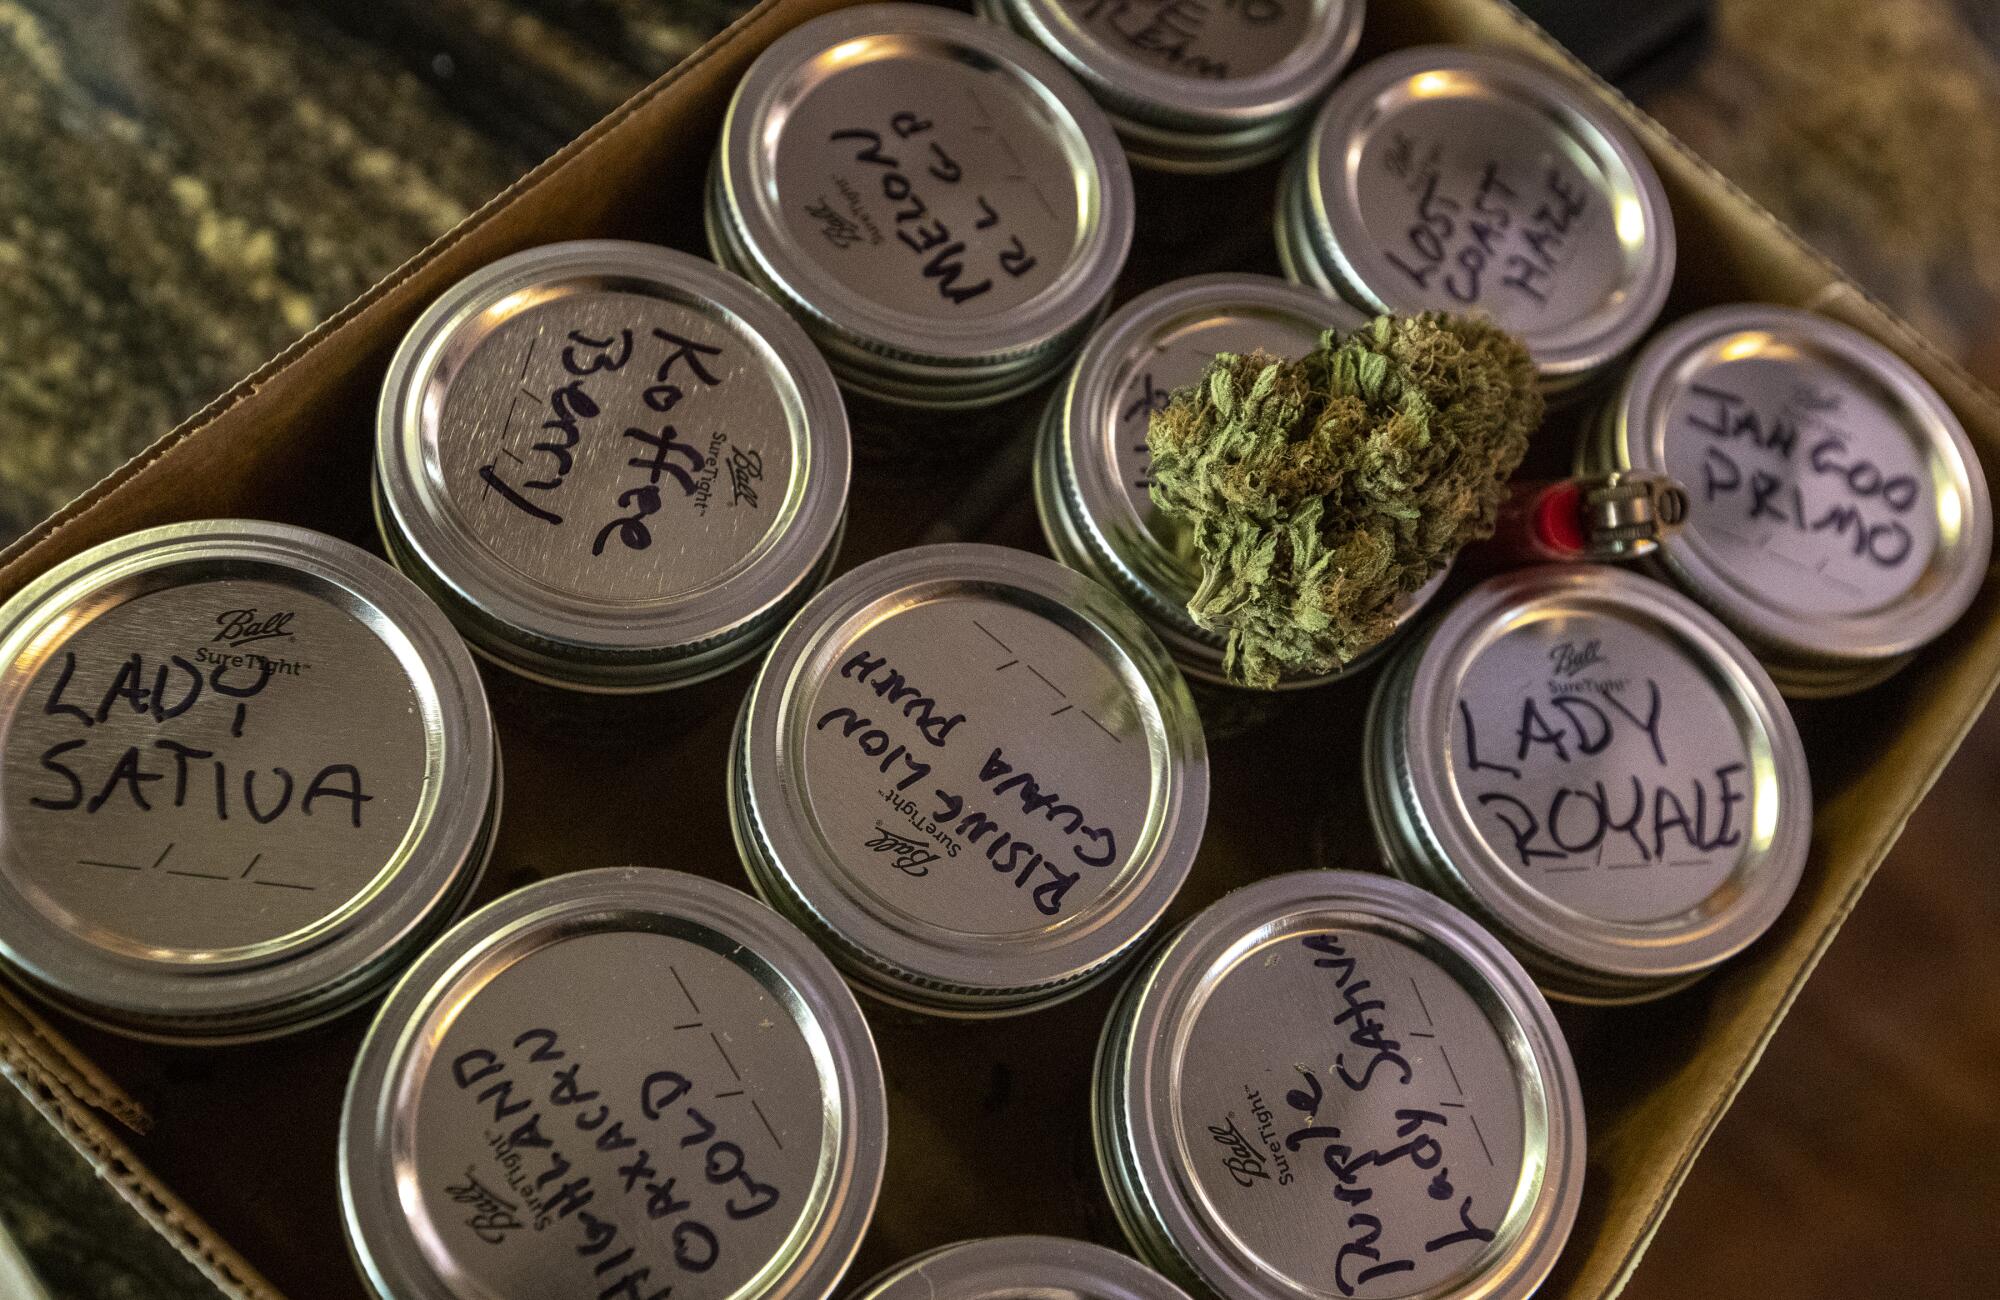 A collection of samples of cannabis.